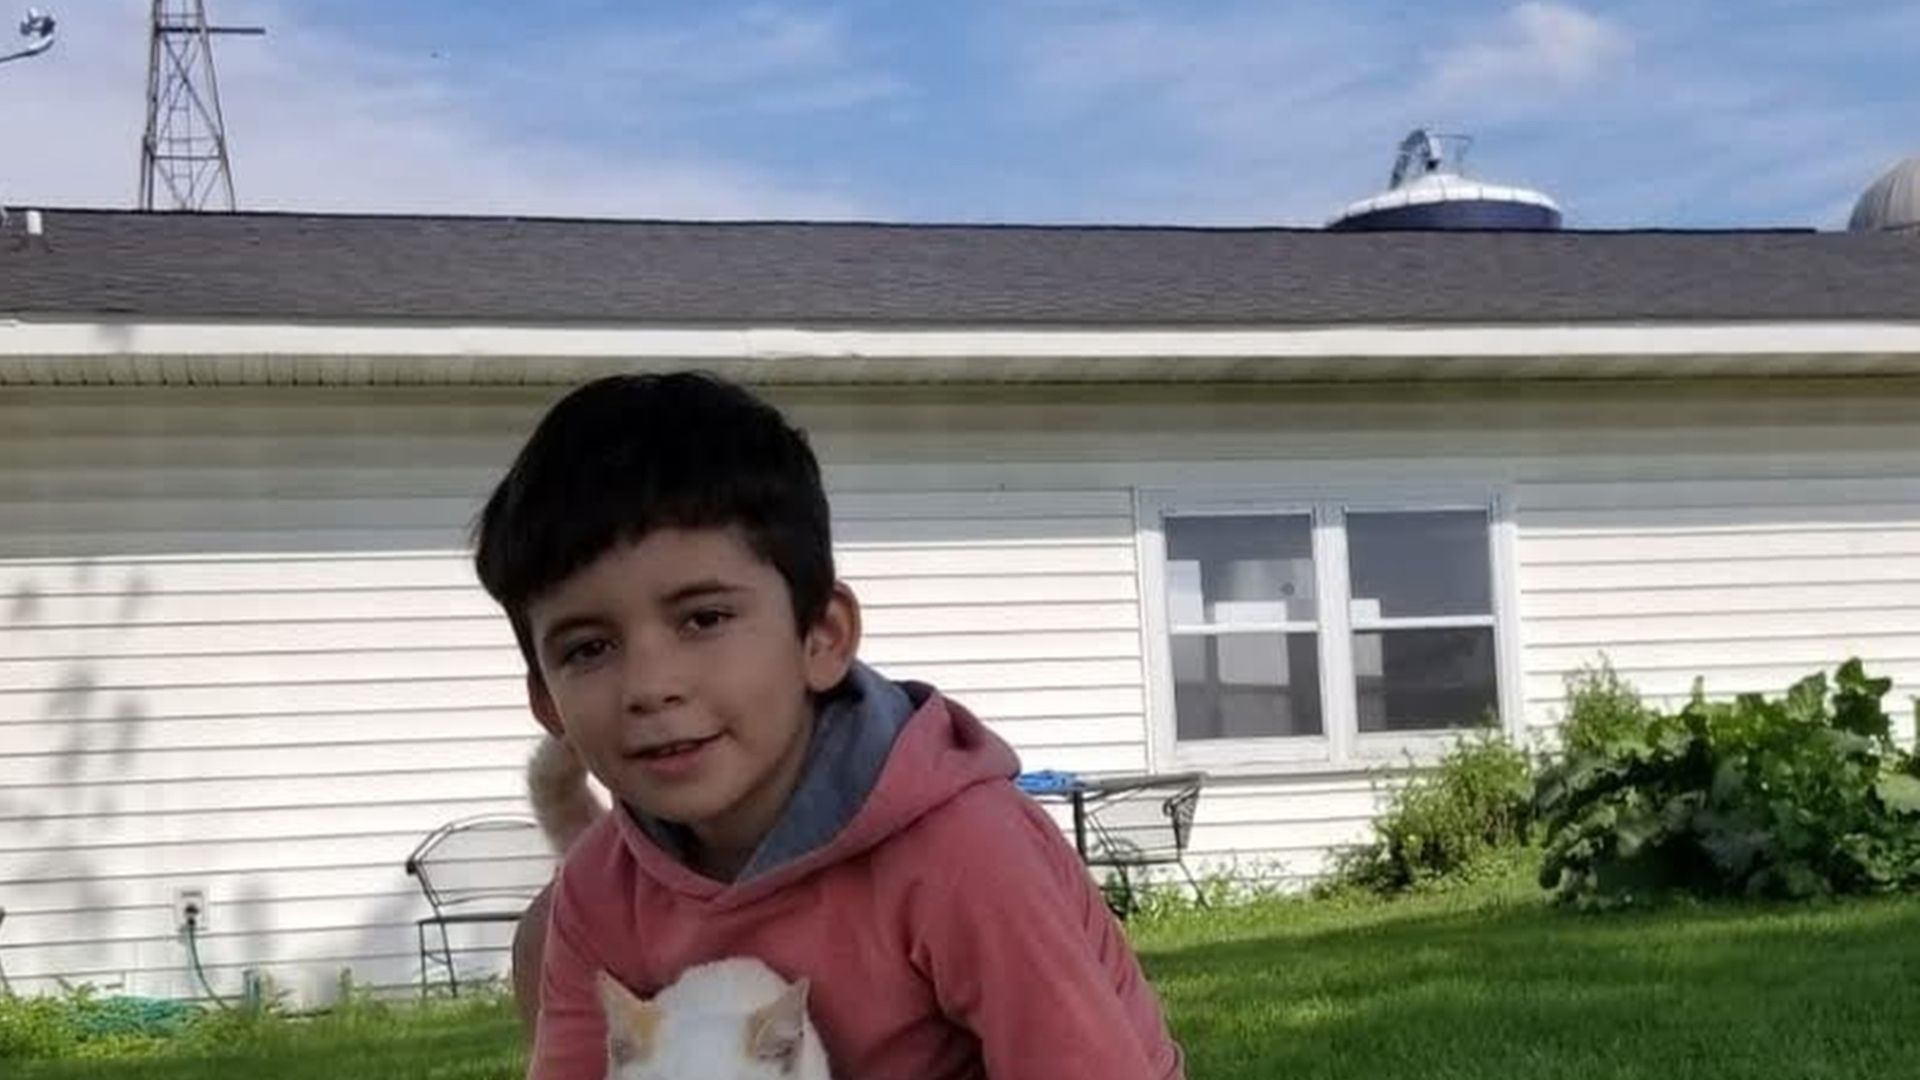 Jefferson Rodríguez at D&K Dairy in Dane, Wisconsin holds a cat.